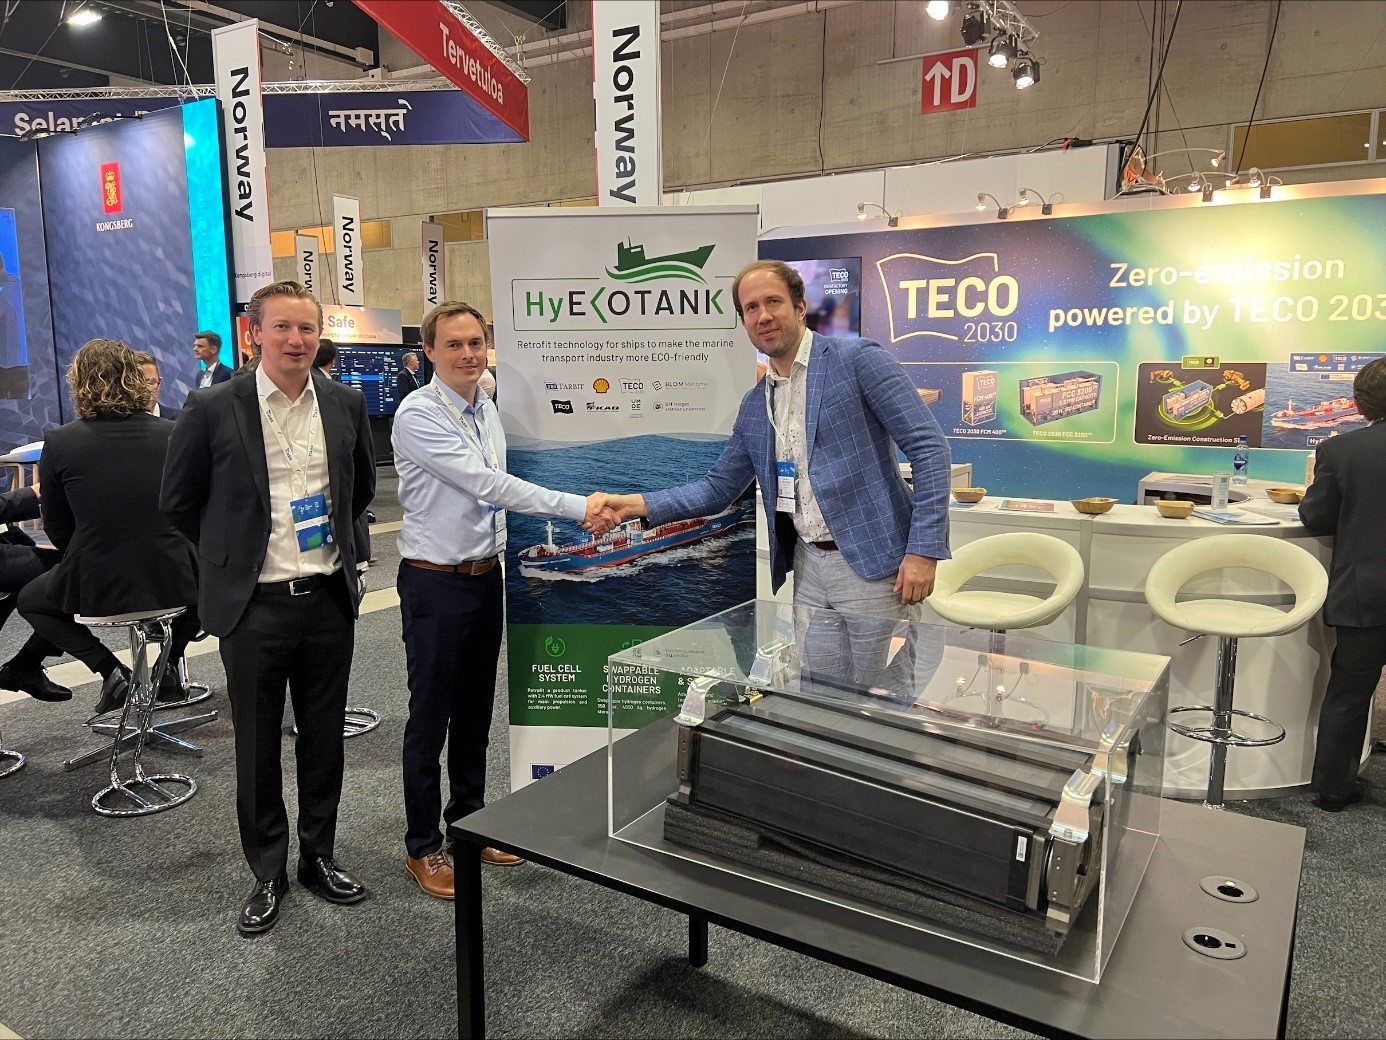 TECO 2030 and Skeleton Technologies enter into a strategic partnership to boost renewable hydrogen as a zero-carbon fuel for the maritime sector. From left, TECO 2030 COO Tor-Erik Hoftun and Director of Business Development Fredrik Aarskog, together with Sales Director Kersten Eero from Skeleton Technologies on the right.